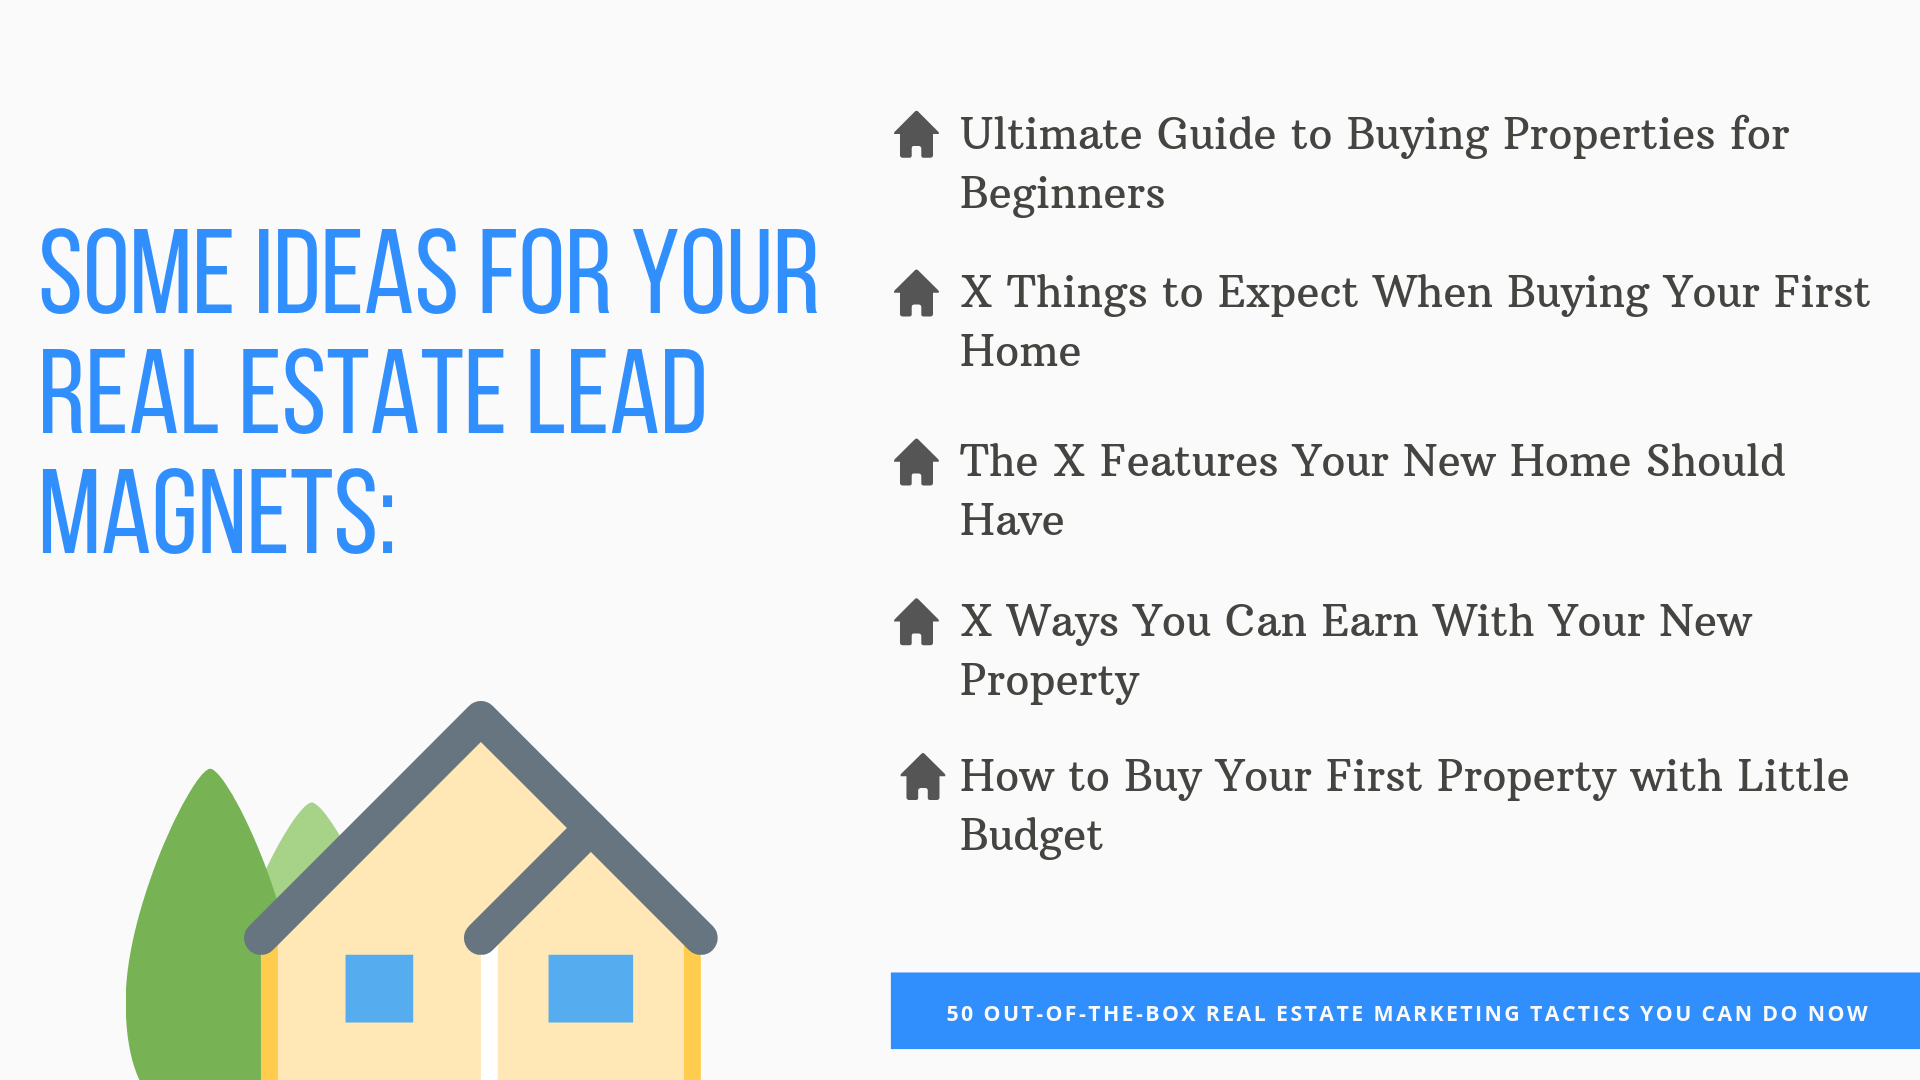 SOME IDEAS FOR YOUR REAL ESTATE LEAD MAGNETS